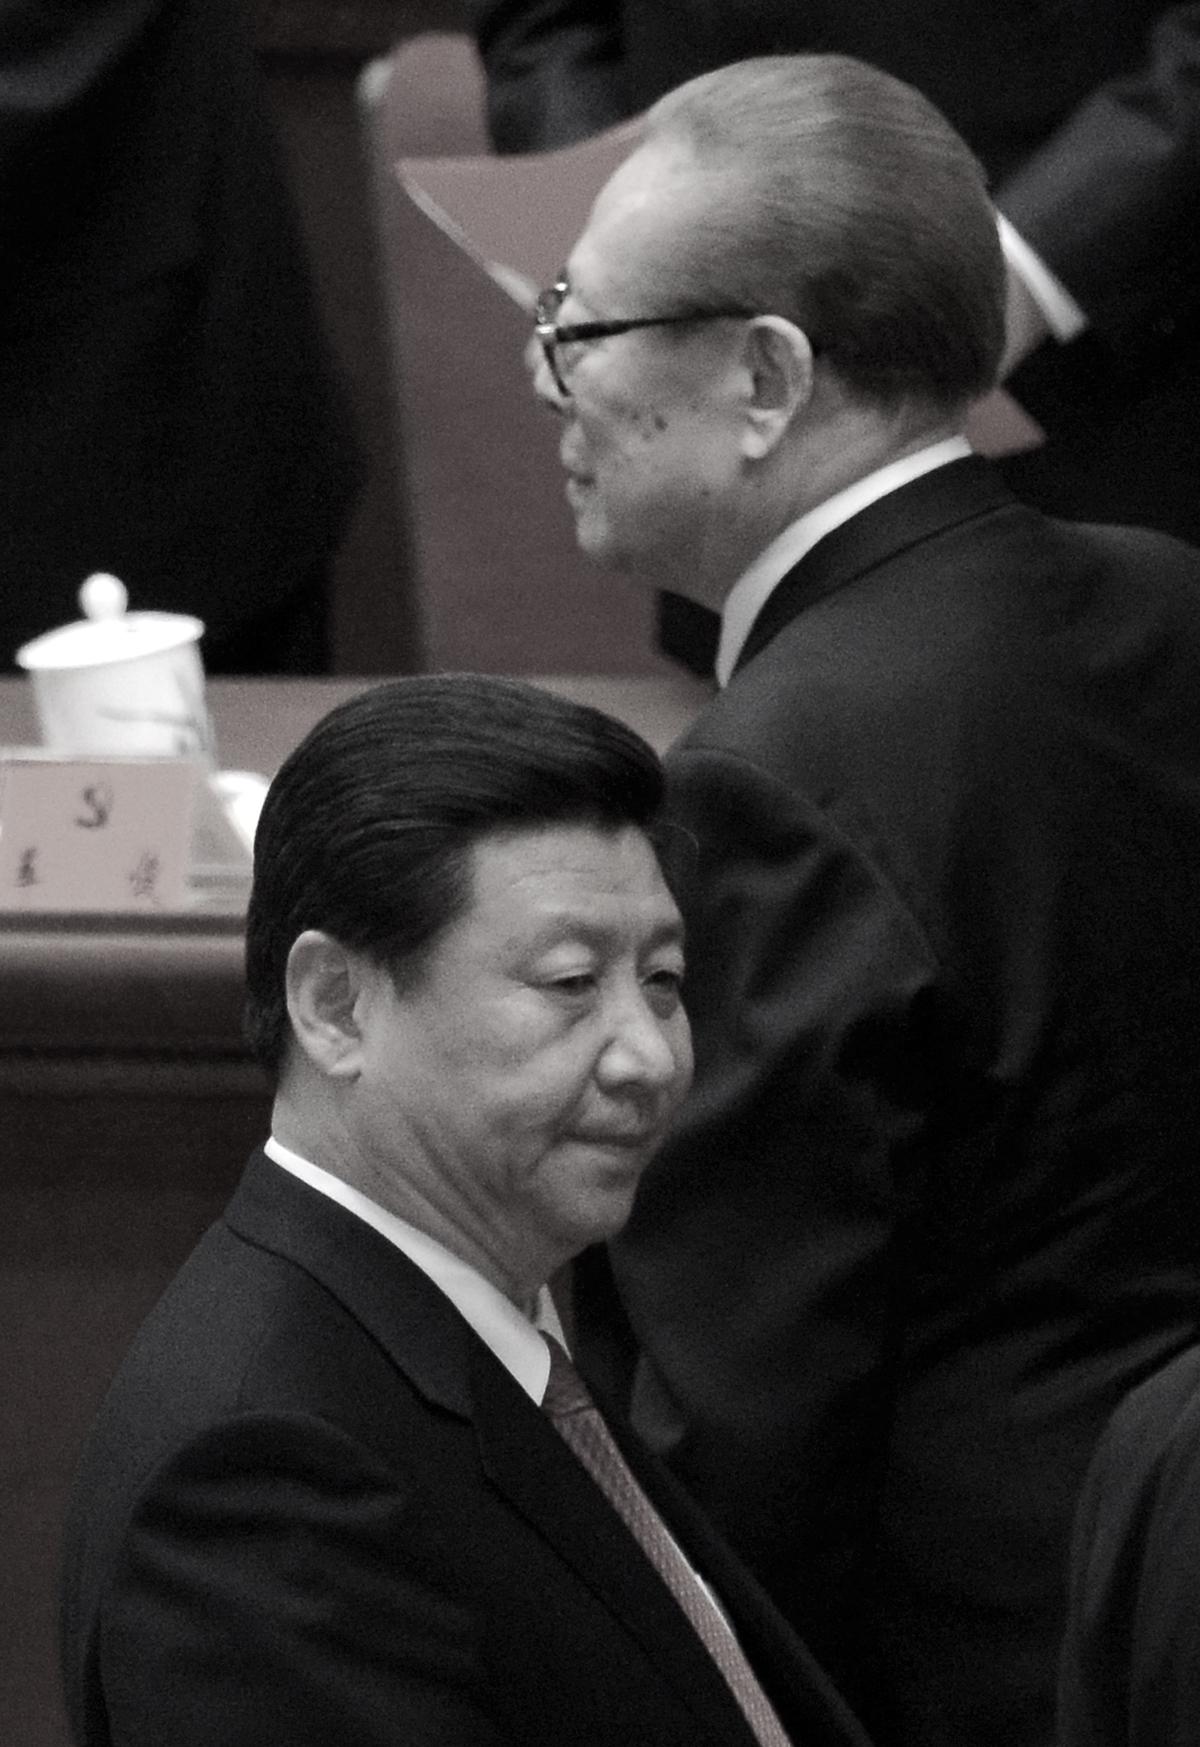 Former Chinese Communist Party head Jiang Zemin (R) walks by Xi Jinping (L) after the closing of the 18th Communist Party Congress at the Great Hall of the People in Beijing on Nov. 14, 2012. At this Party Congress Xi was formally appointed to head the CCP. (Wang Zhao/AFP/Getty Images)